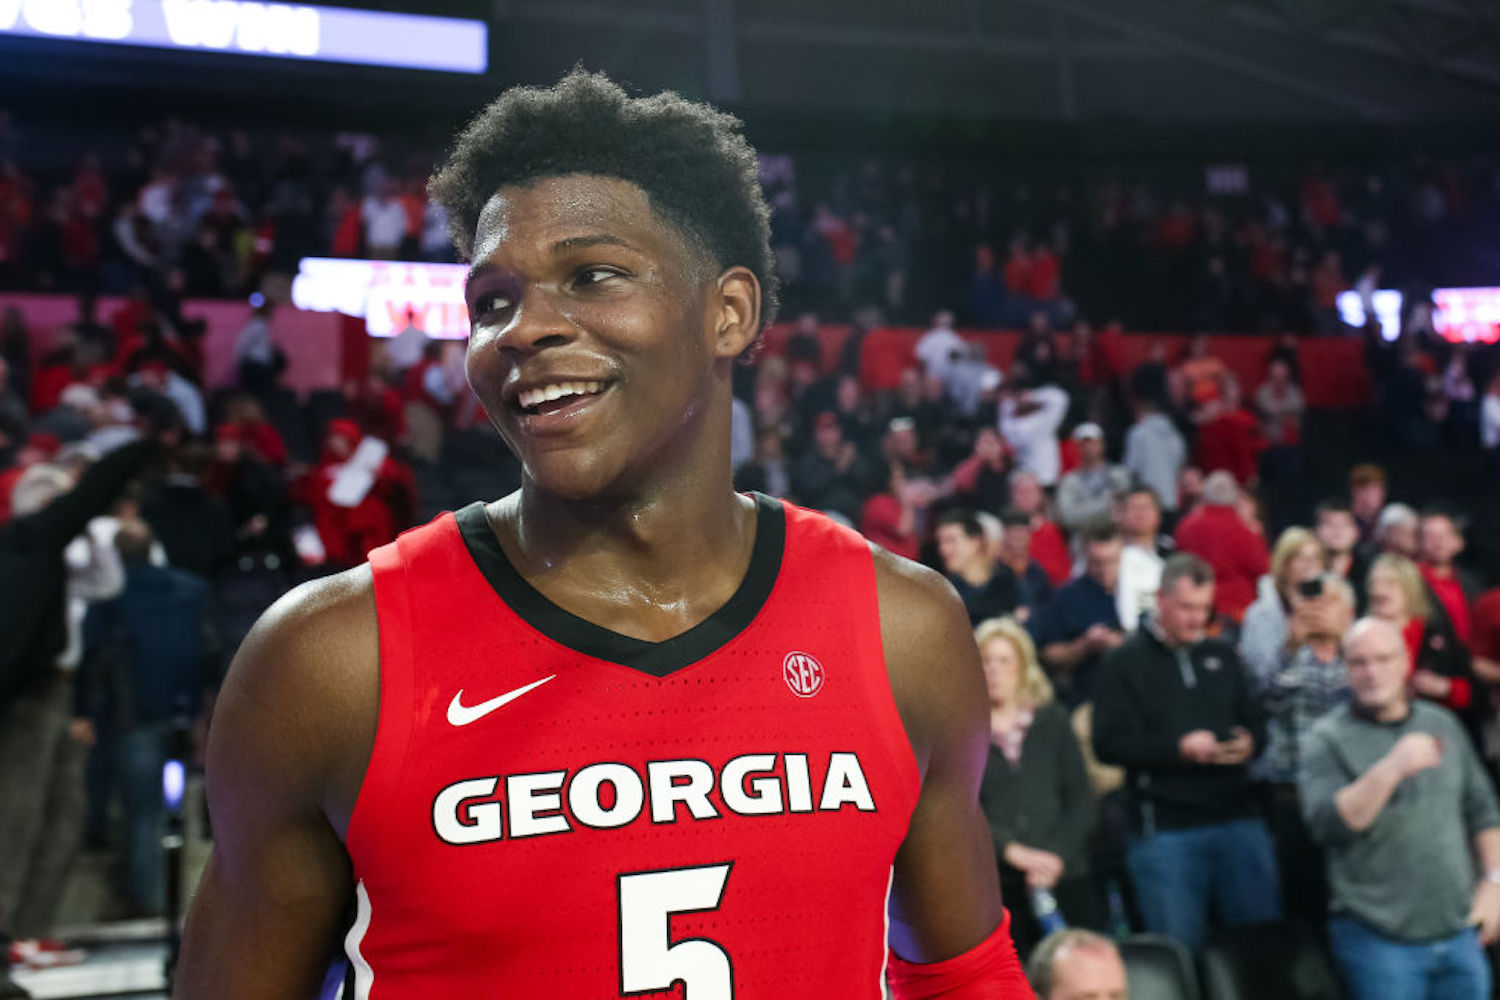 Anthony Edwards is projected to be a top-three NBA draft pick in 2020. Here's everything you need to know about the star prospect.